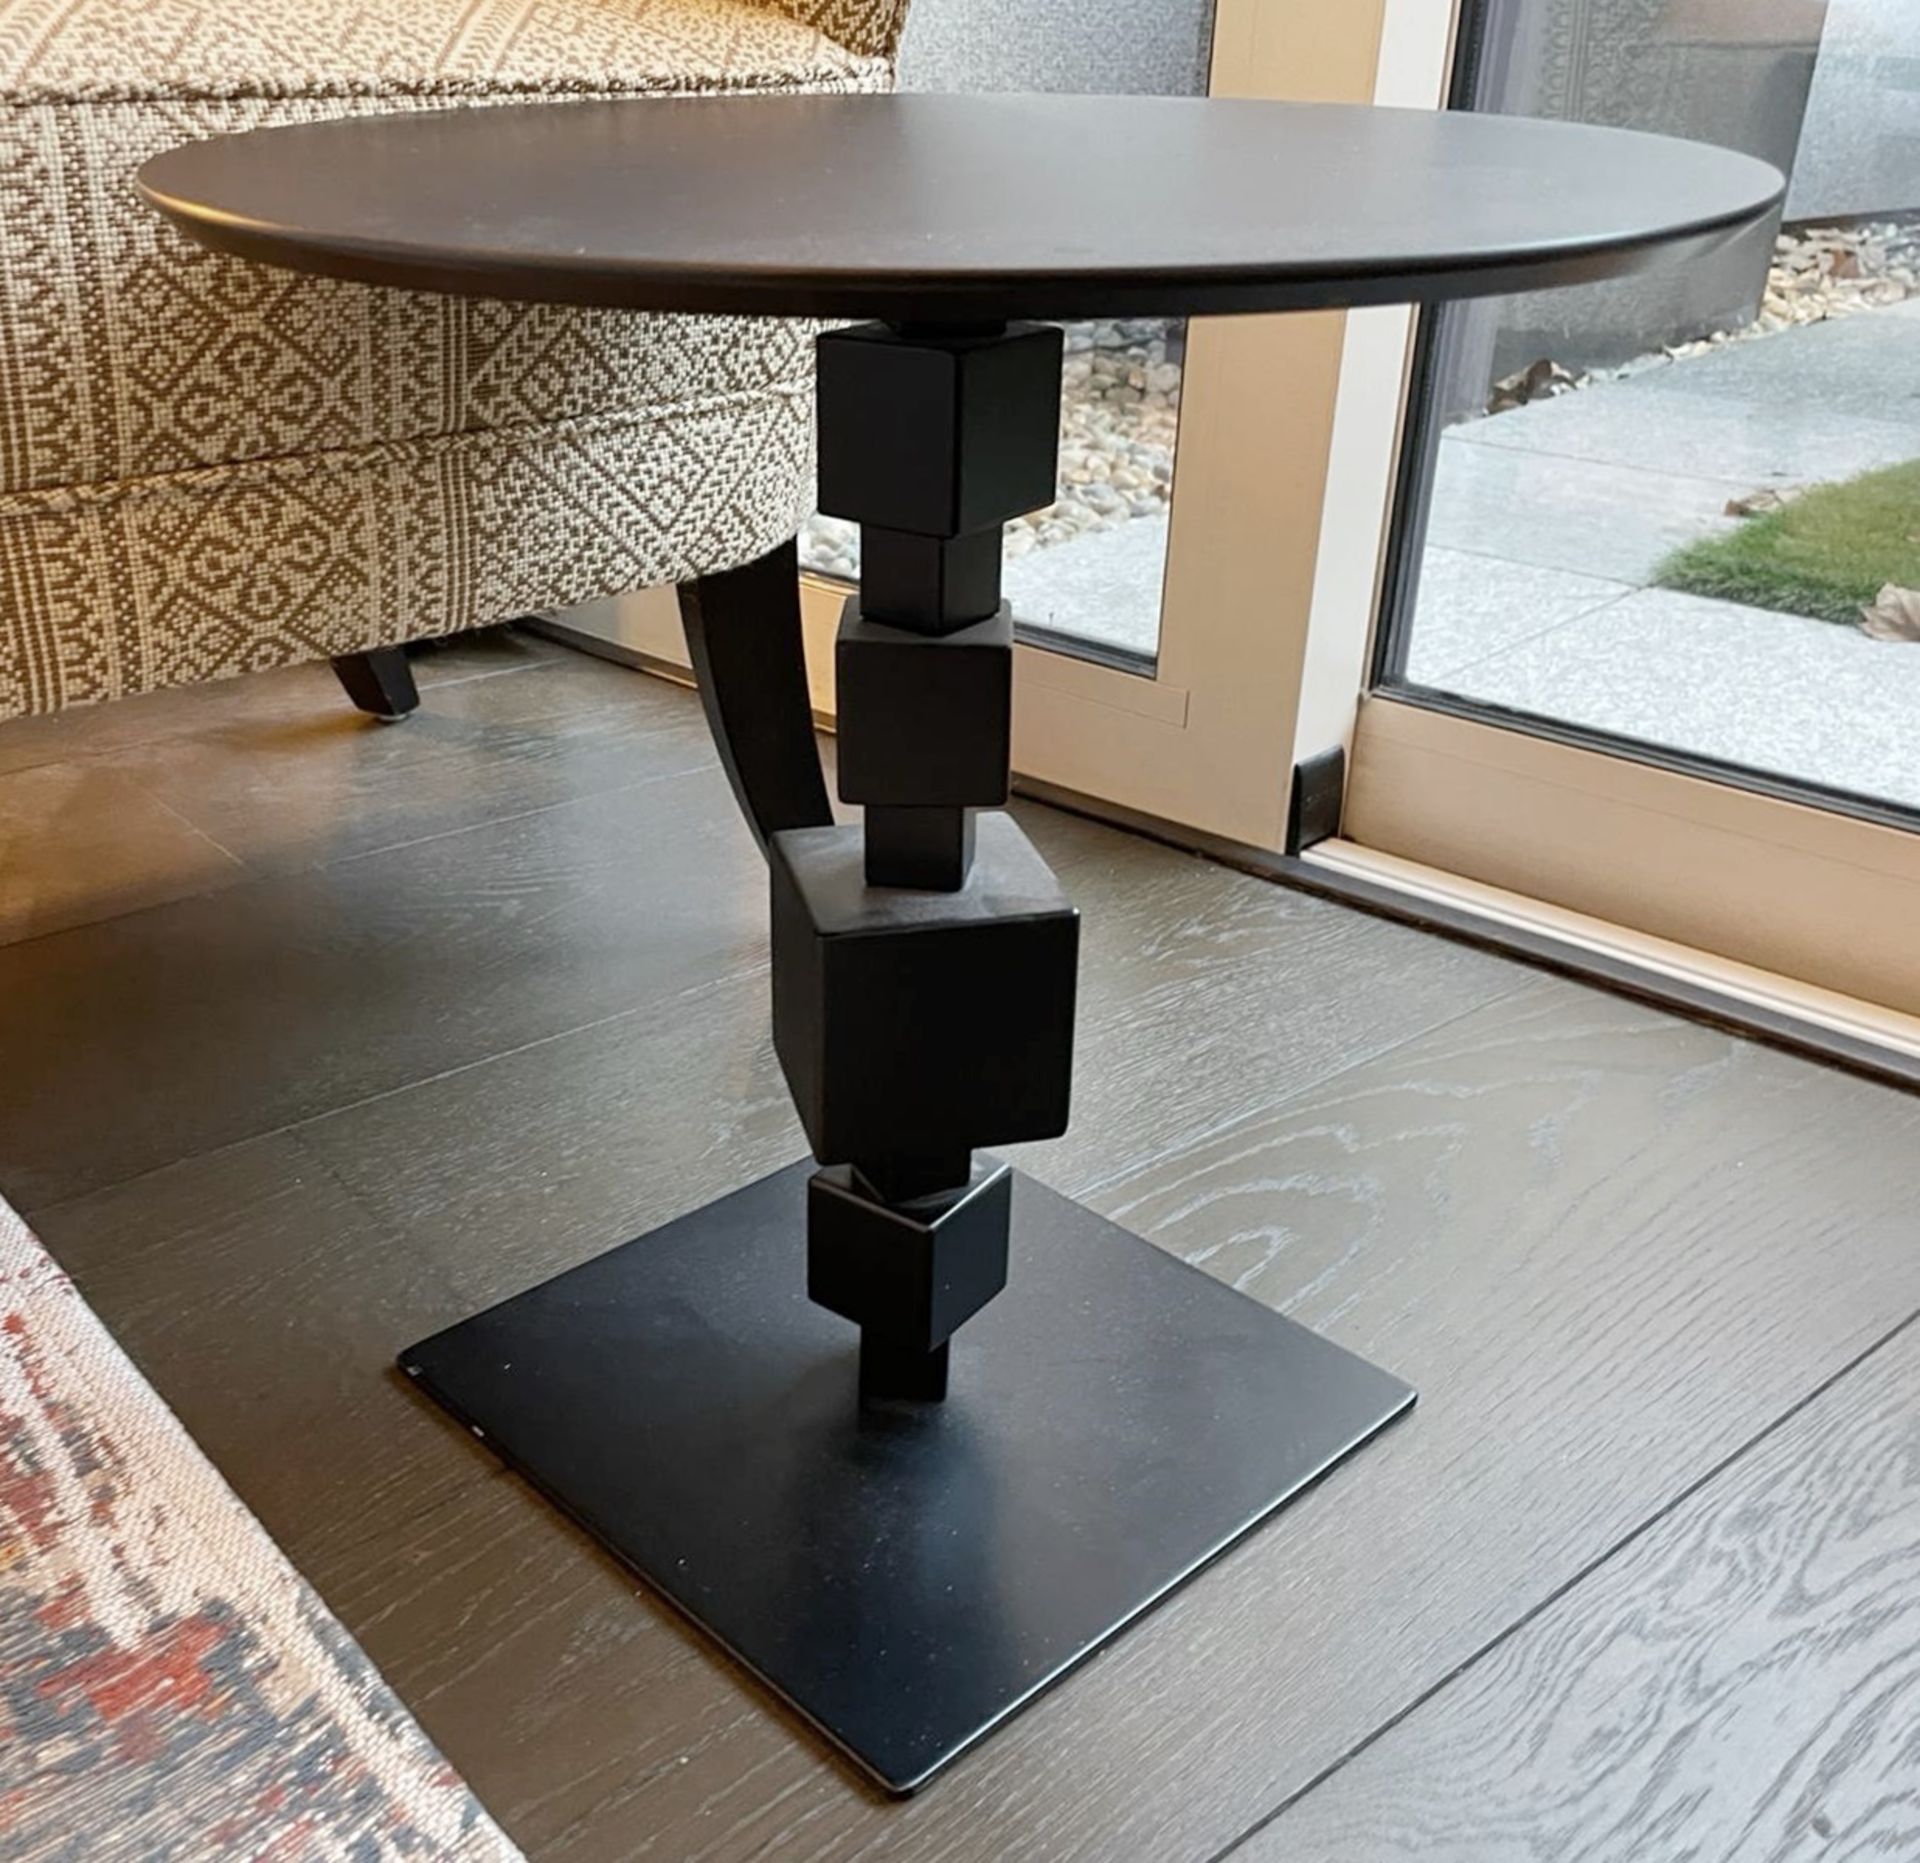 1 x NOLITA Occasional Side Table with a Cubed Metal Base, Bronzed Finish and Industrial - Image 3 of 5